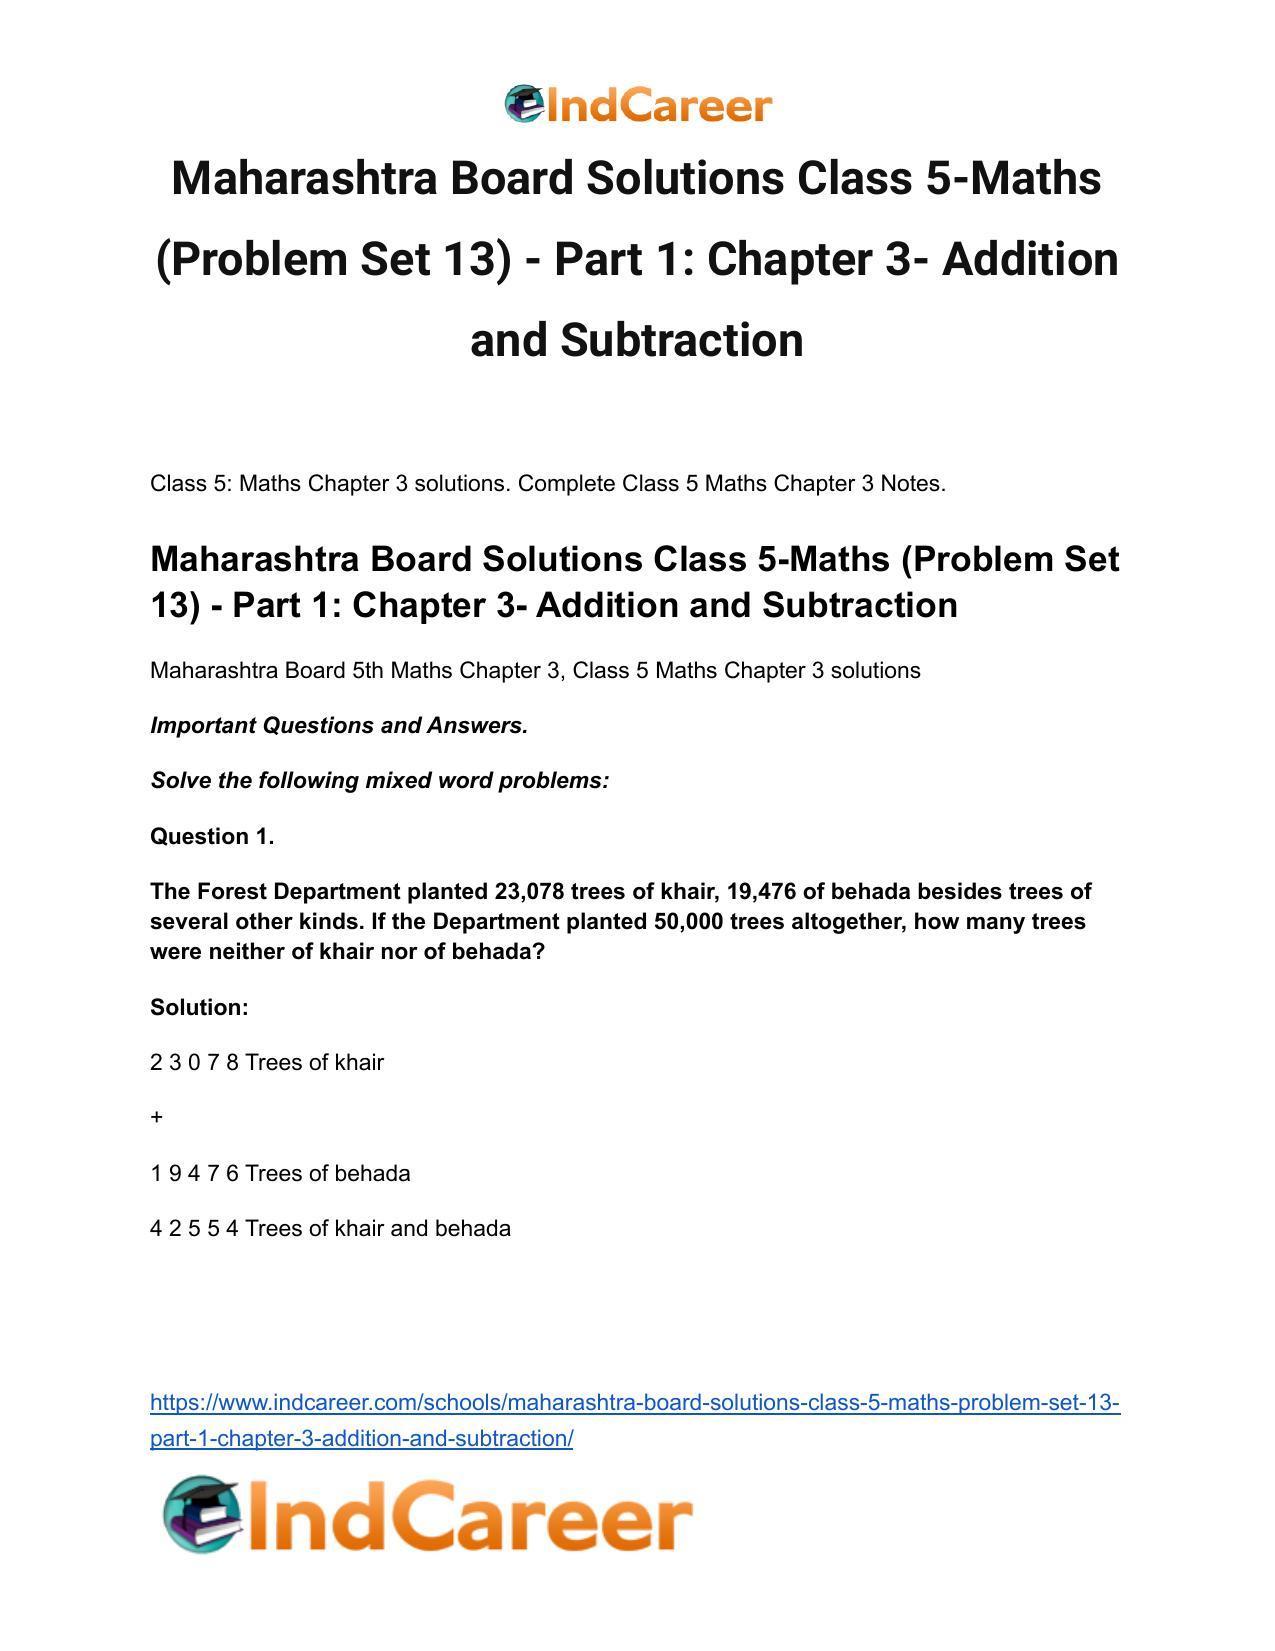 Maharashtra Board Solutions Class 5-Maths (Problem Set 13) - Part 1: Chapter 3- Addition and Subtraction - Page 2